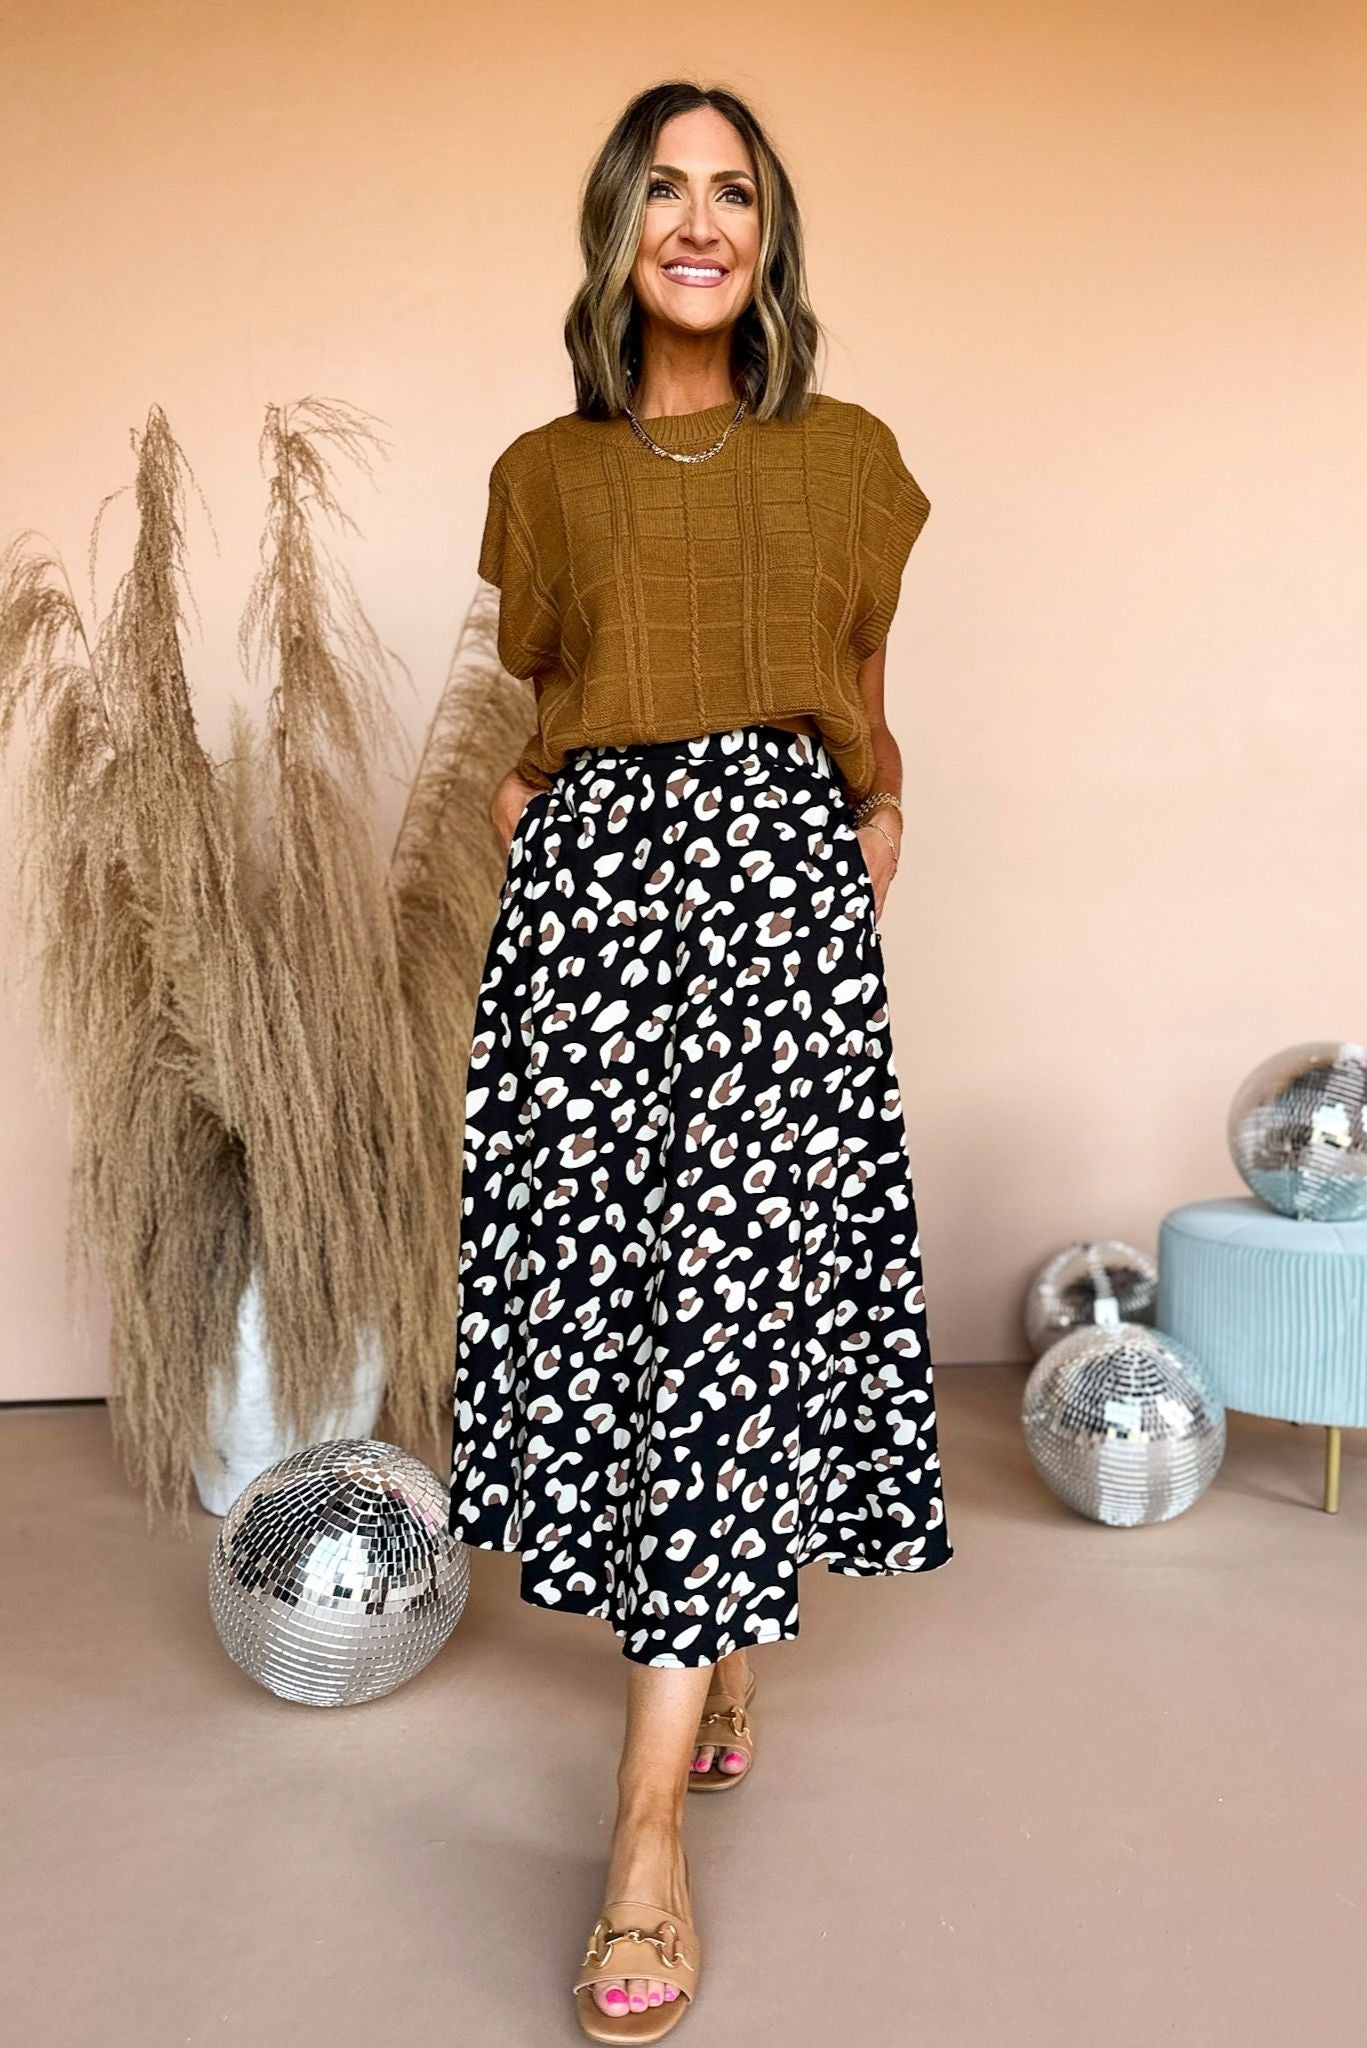 Load image into Gallery viewer, Black Animal Printed Pull On Midi Skirt, mom chic, carpool chic, elevated style, must have skirt, fall skirt, transitional skirt, chic style, midi skirt, must have midi, shop style your senses by mallory fitzsimmons
